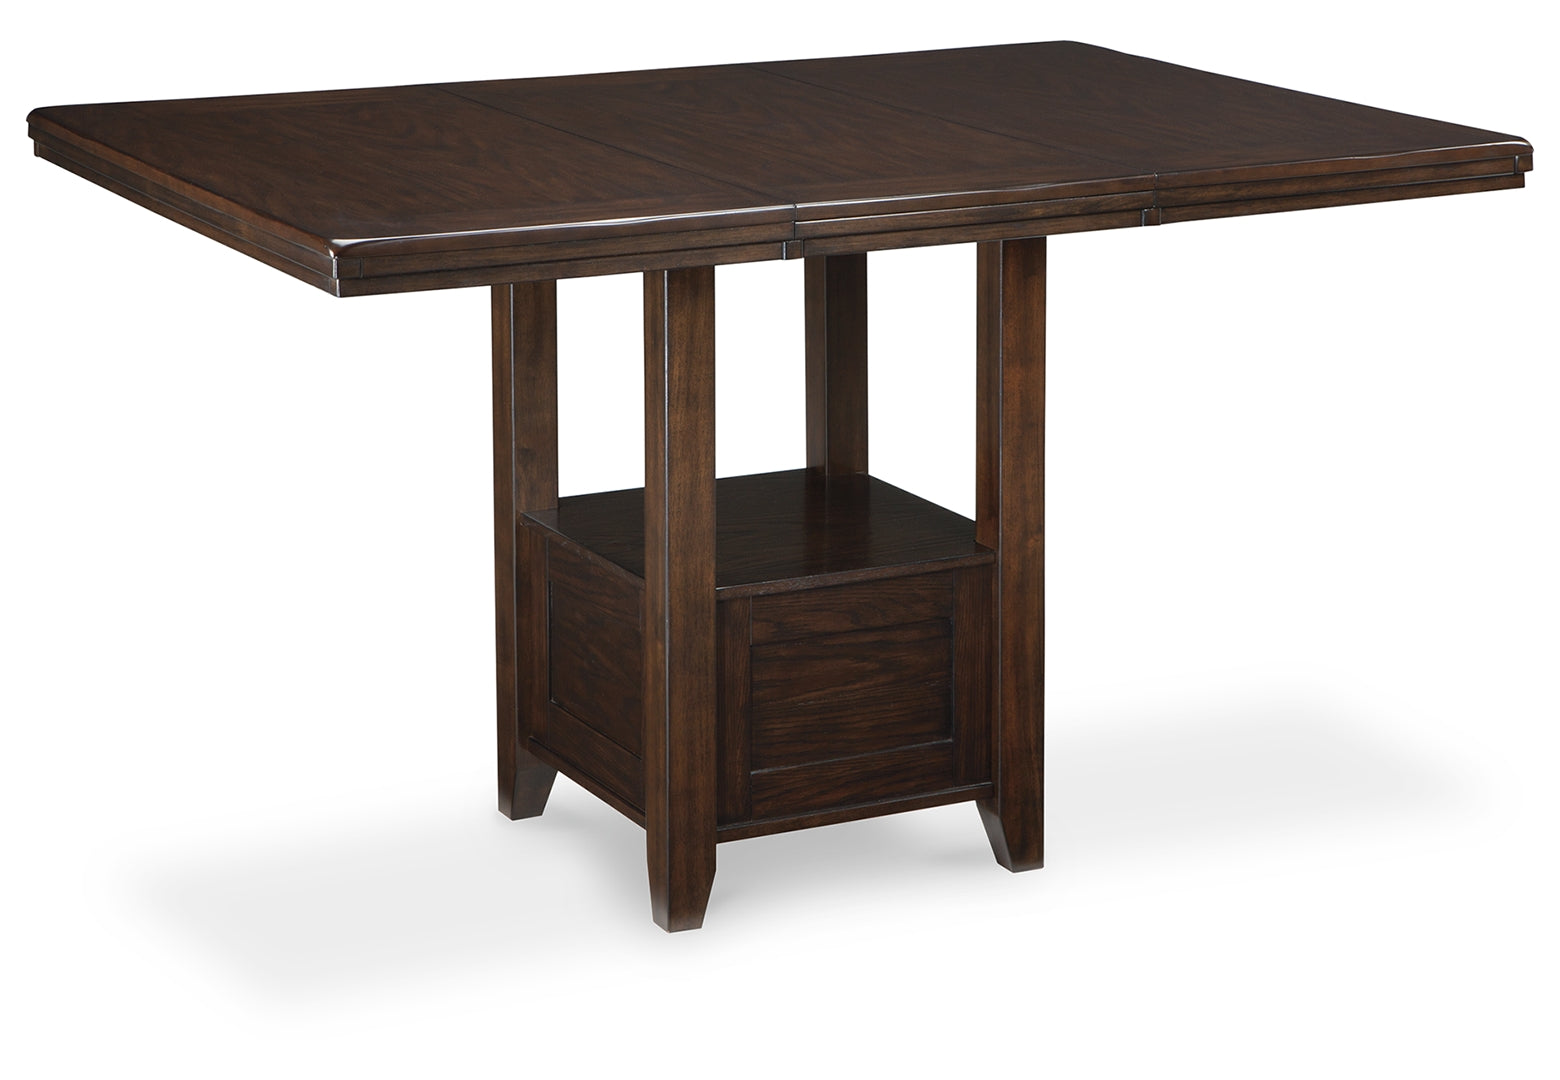 Haddigan Counter Height Dining Extension Table